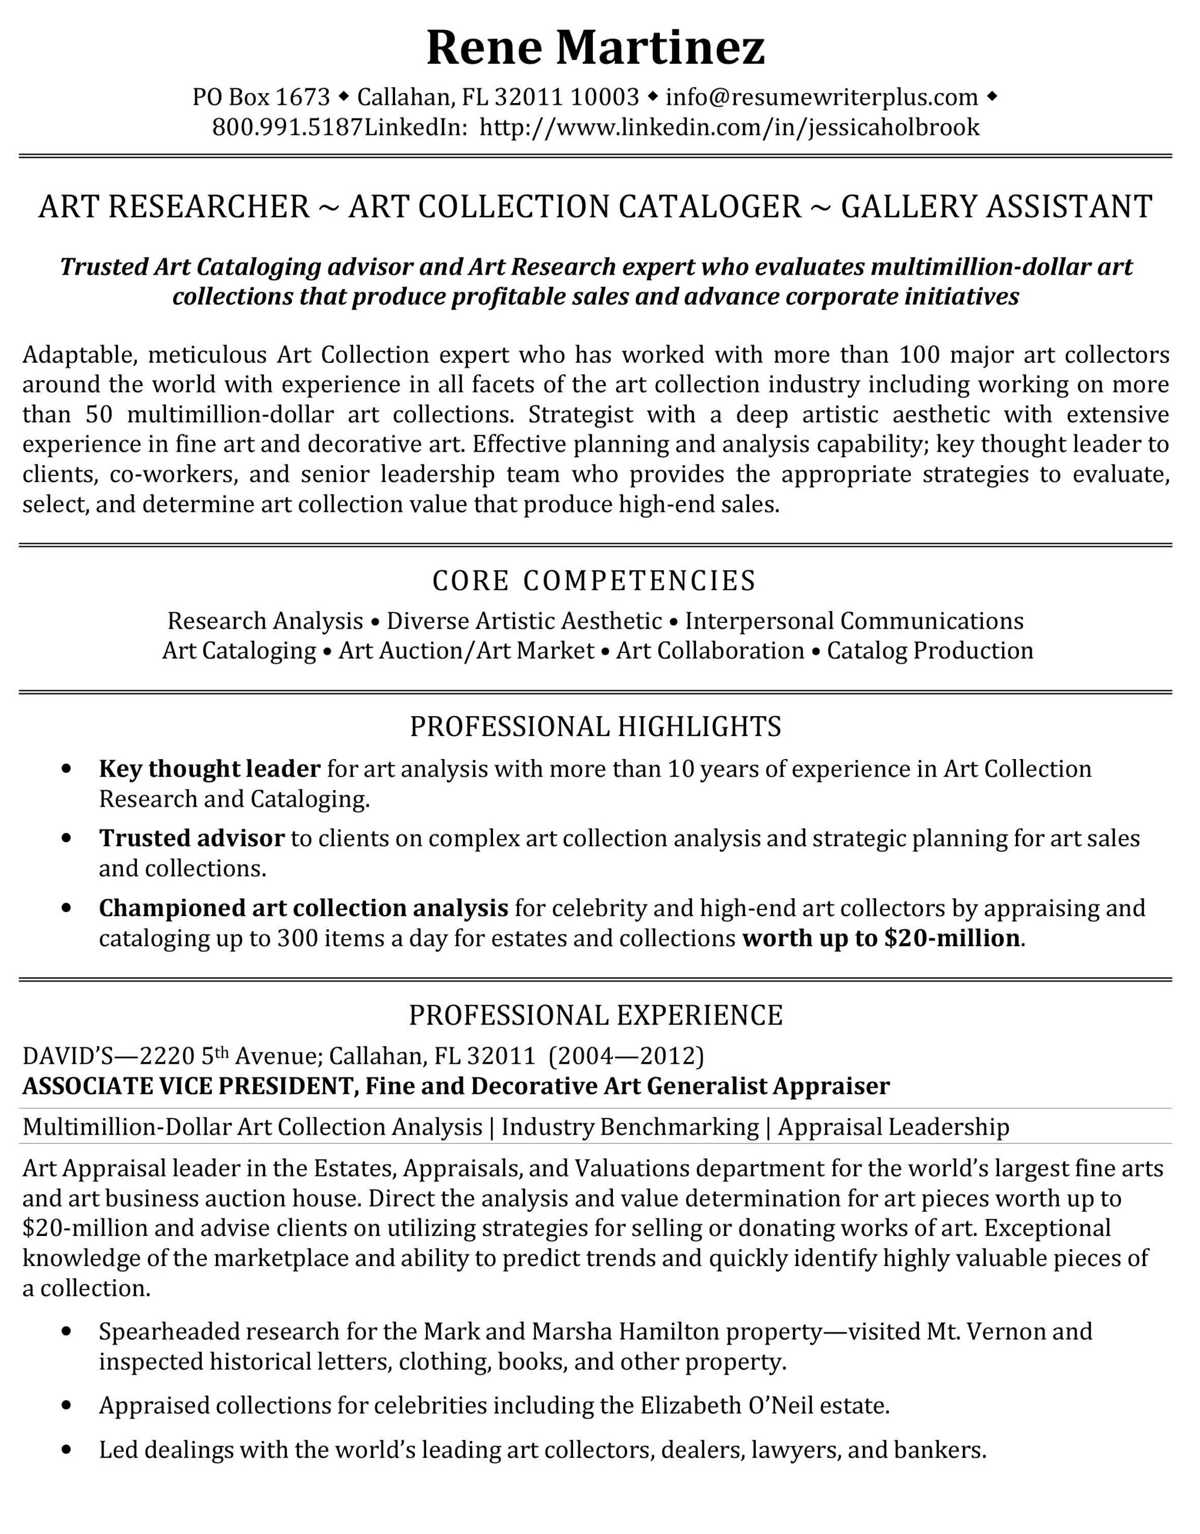 Art-Researcher-Art-Collection-Cataloger-Gallery-Assistant-Resume-1